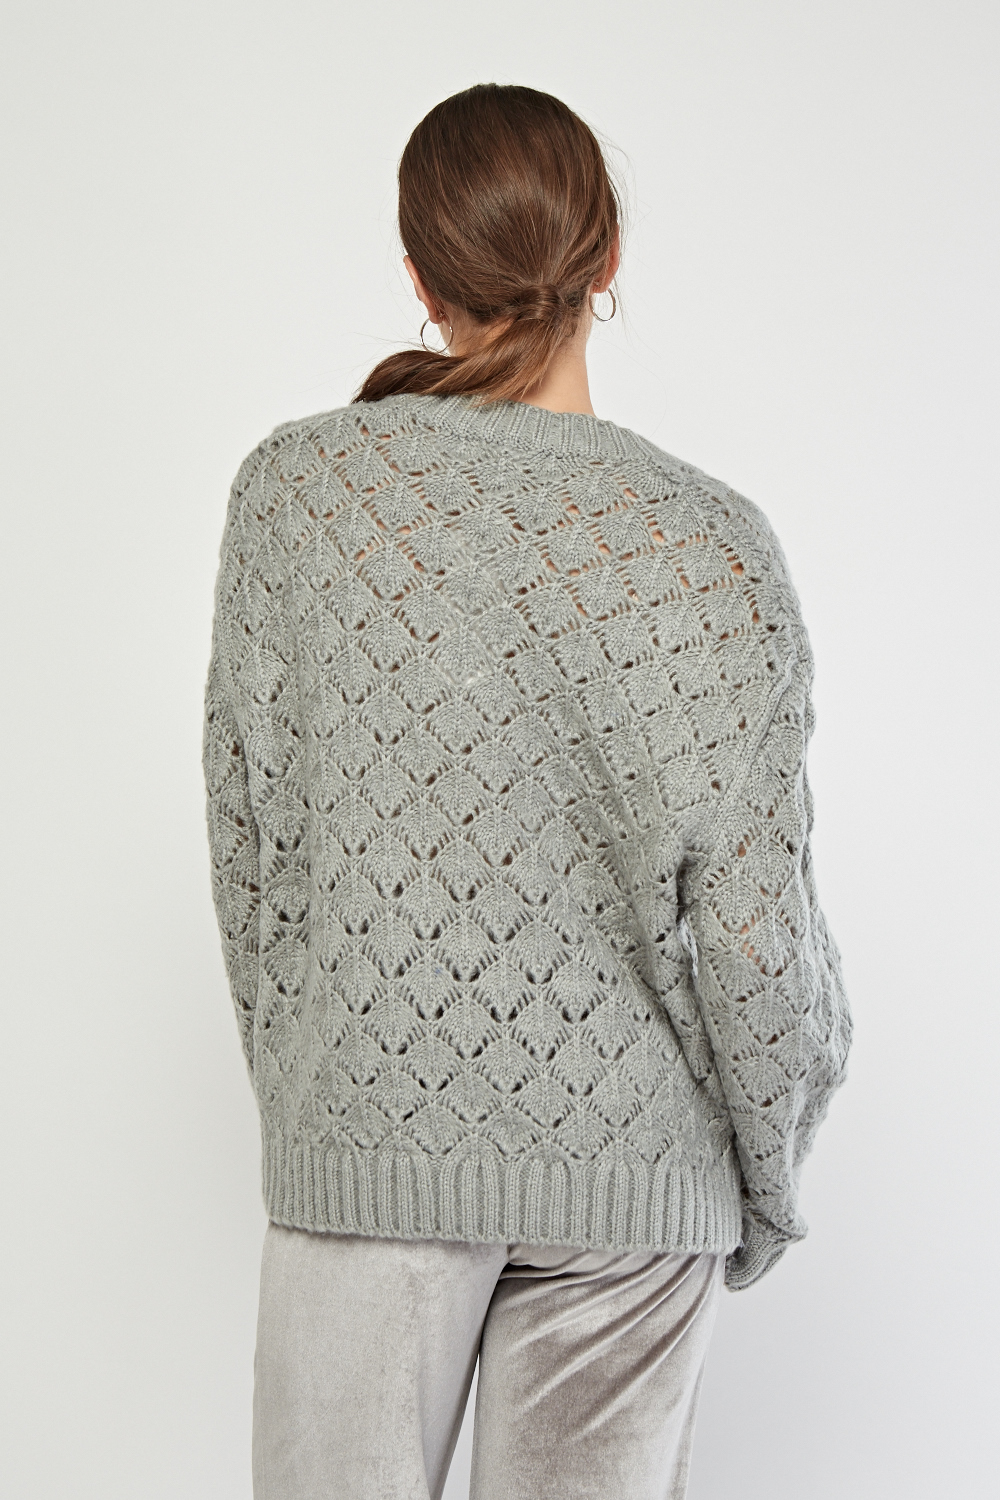 Loose Knit Pattern Sweater - 4 Colours - Just £5